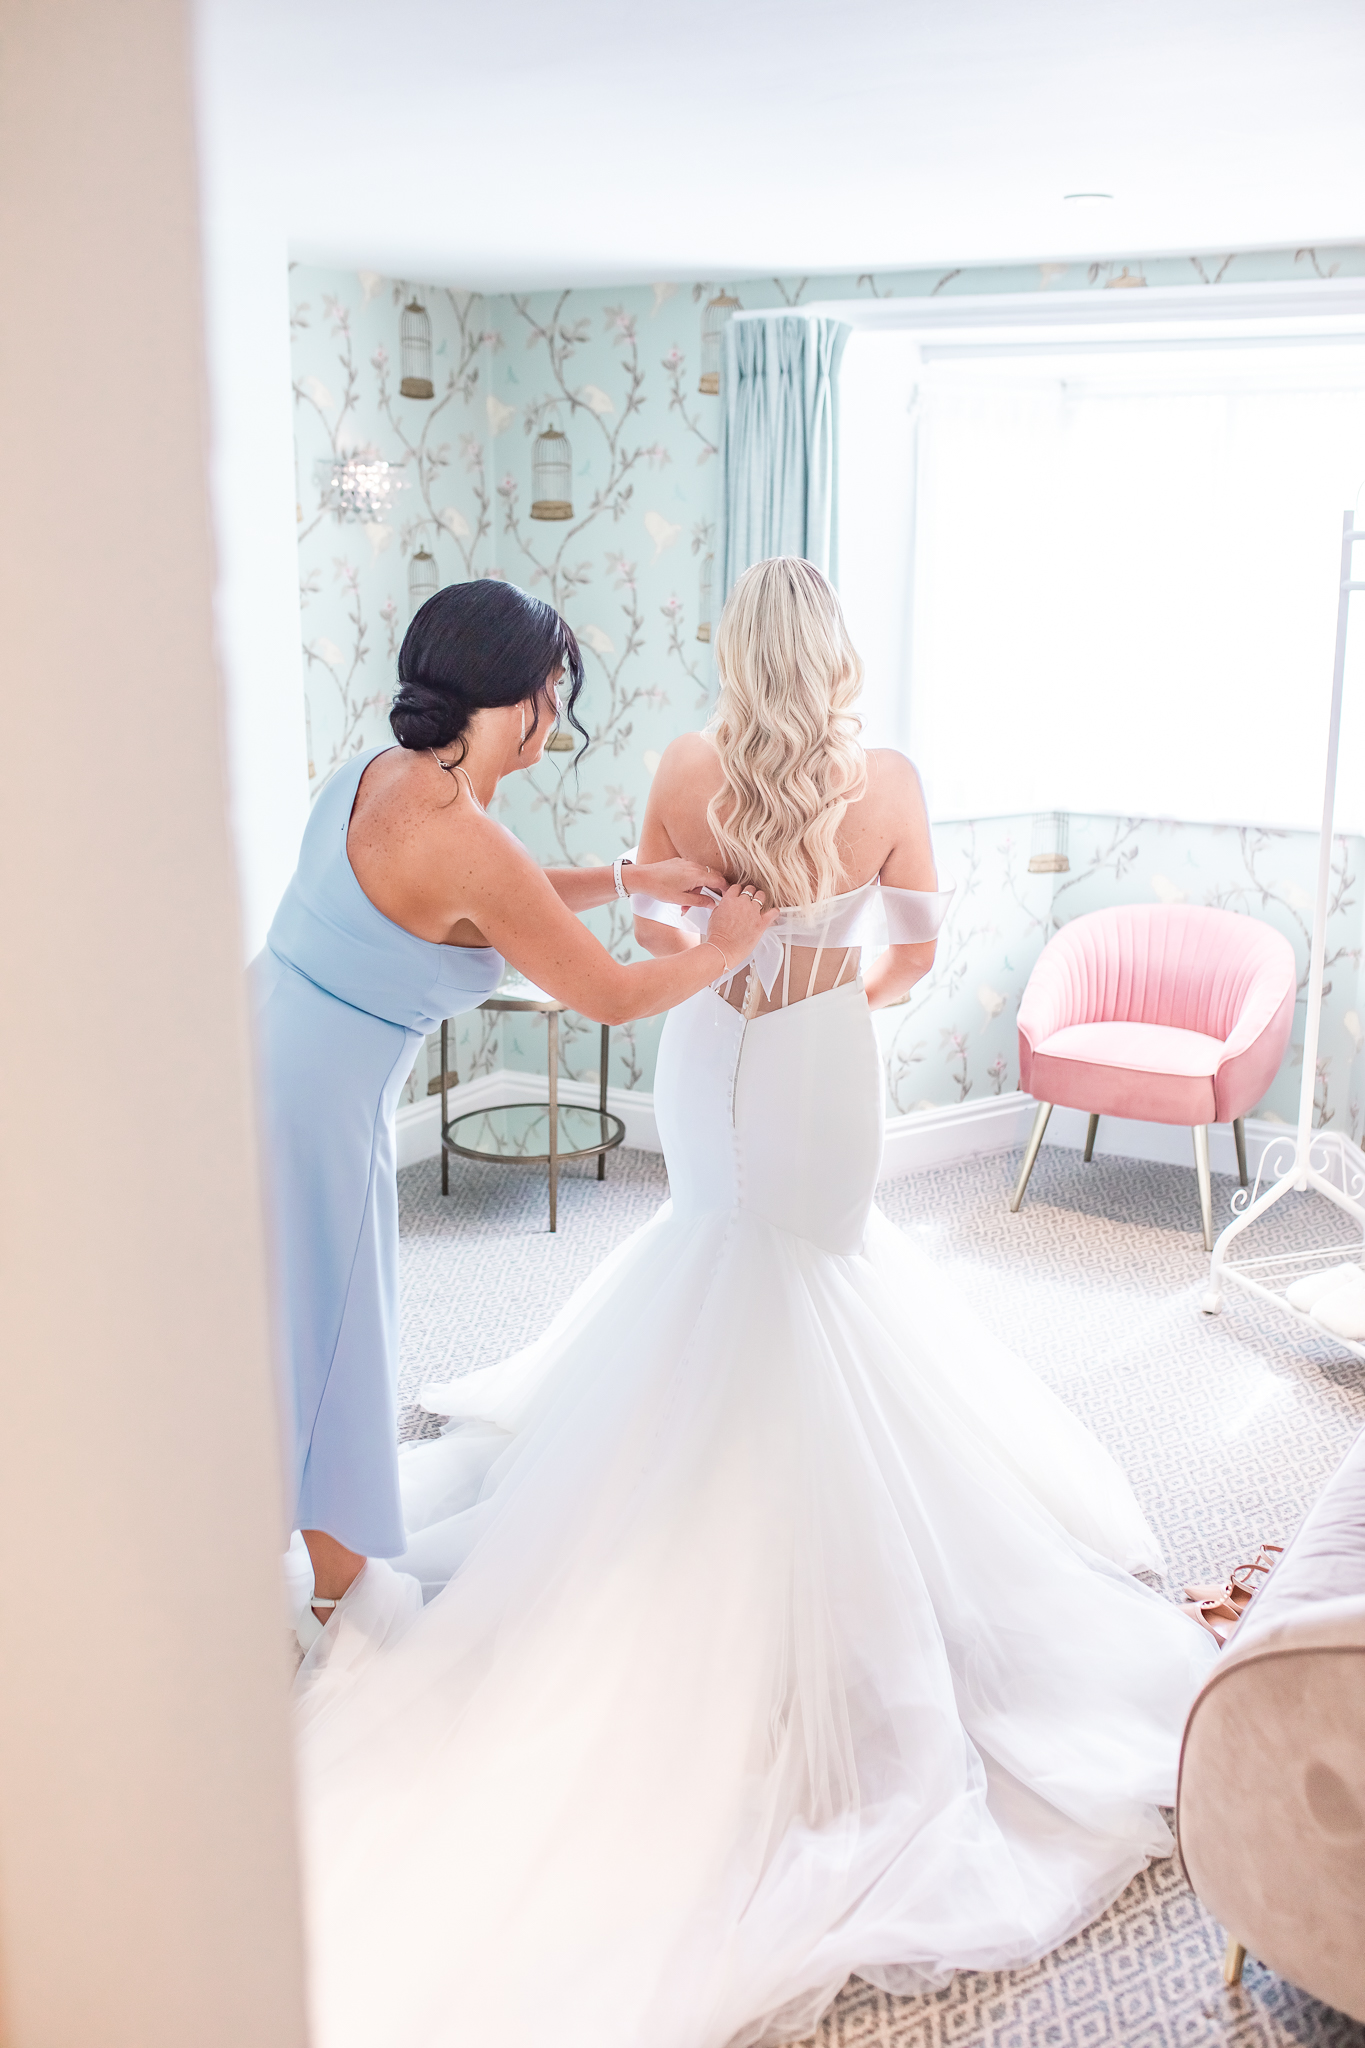 Mother of the bride helping bride, Kelsey with her wedding dress at Keepers Cottage at Combermere Abbey in Cheshire taken by Cheshire wedding photographer, Sophie Siddons